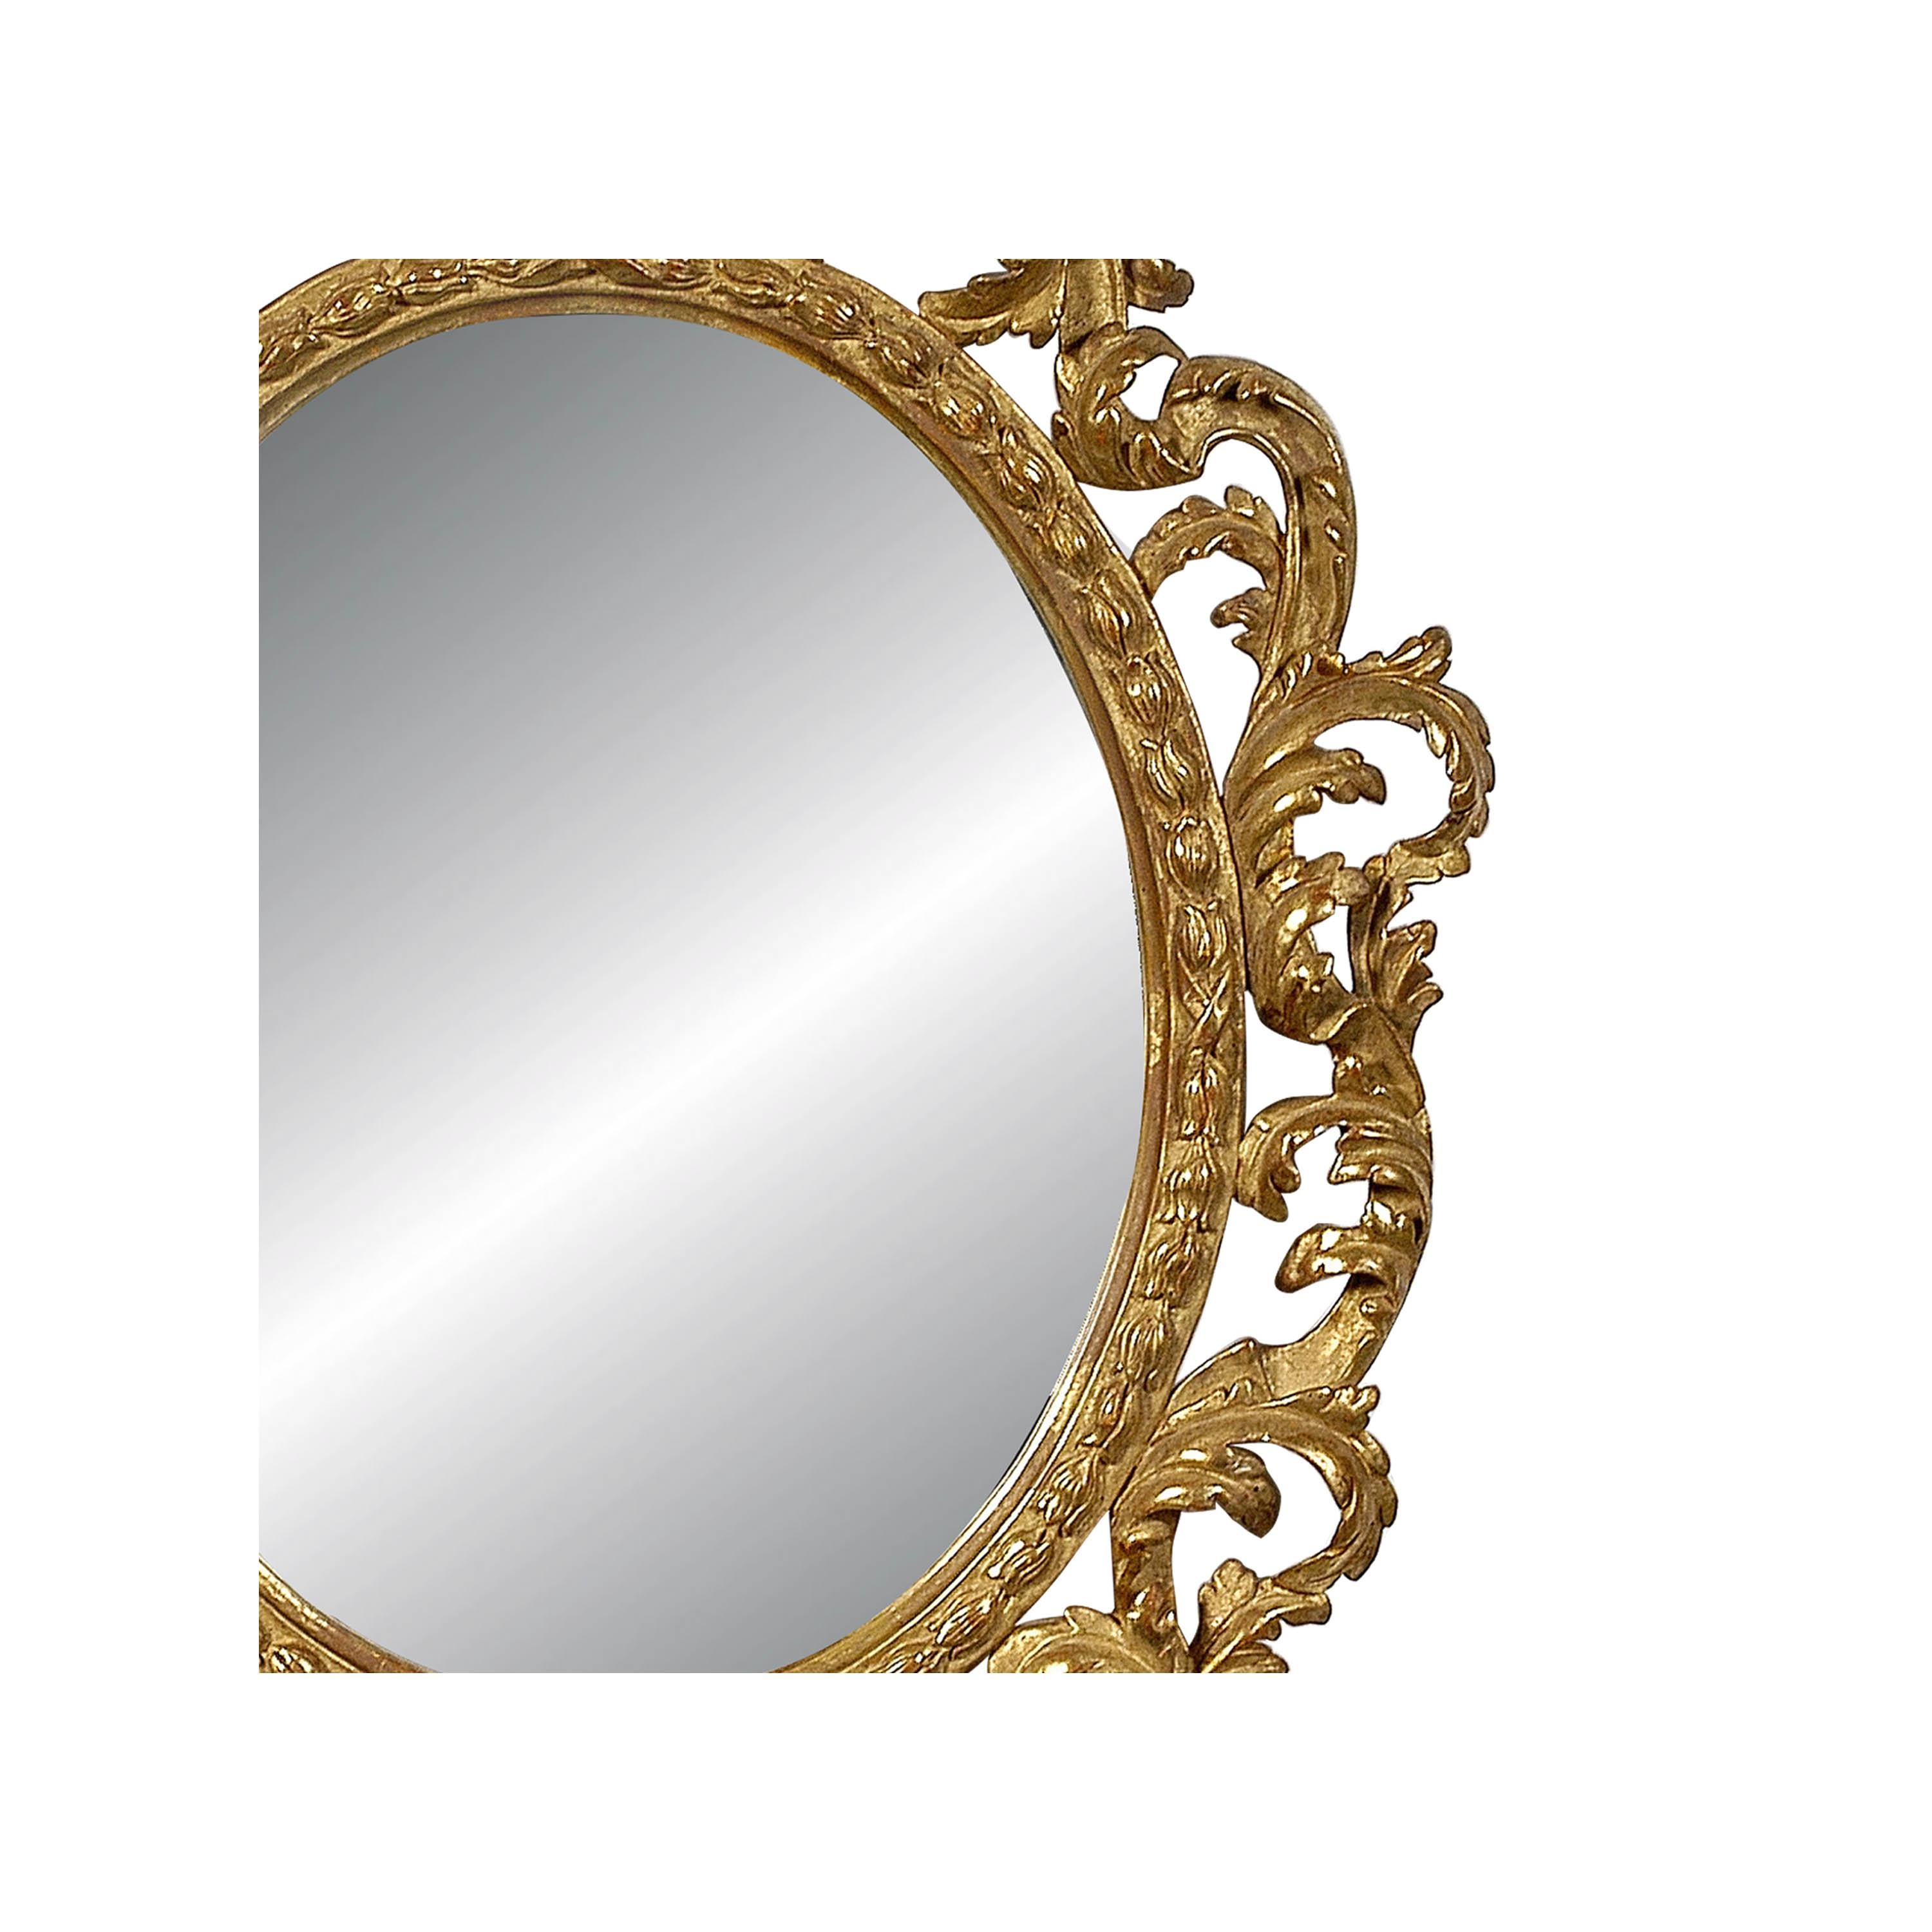 Spanish Neoclassical Baroque Leaf Gold Foil Hand Carved Wooden Mirror, 1970 For Sale